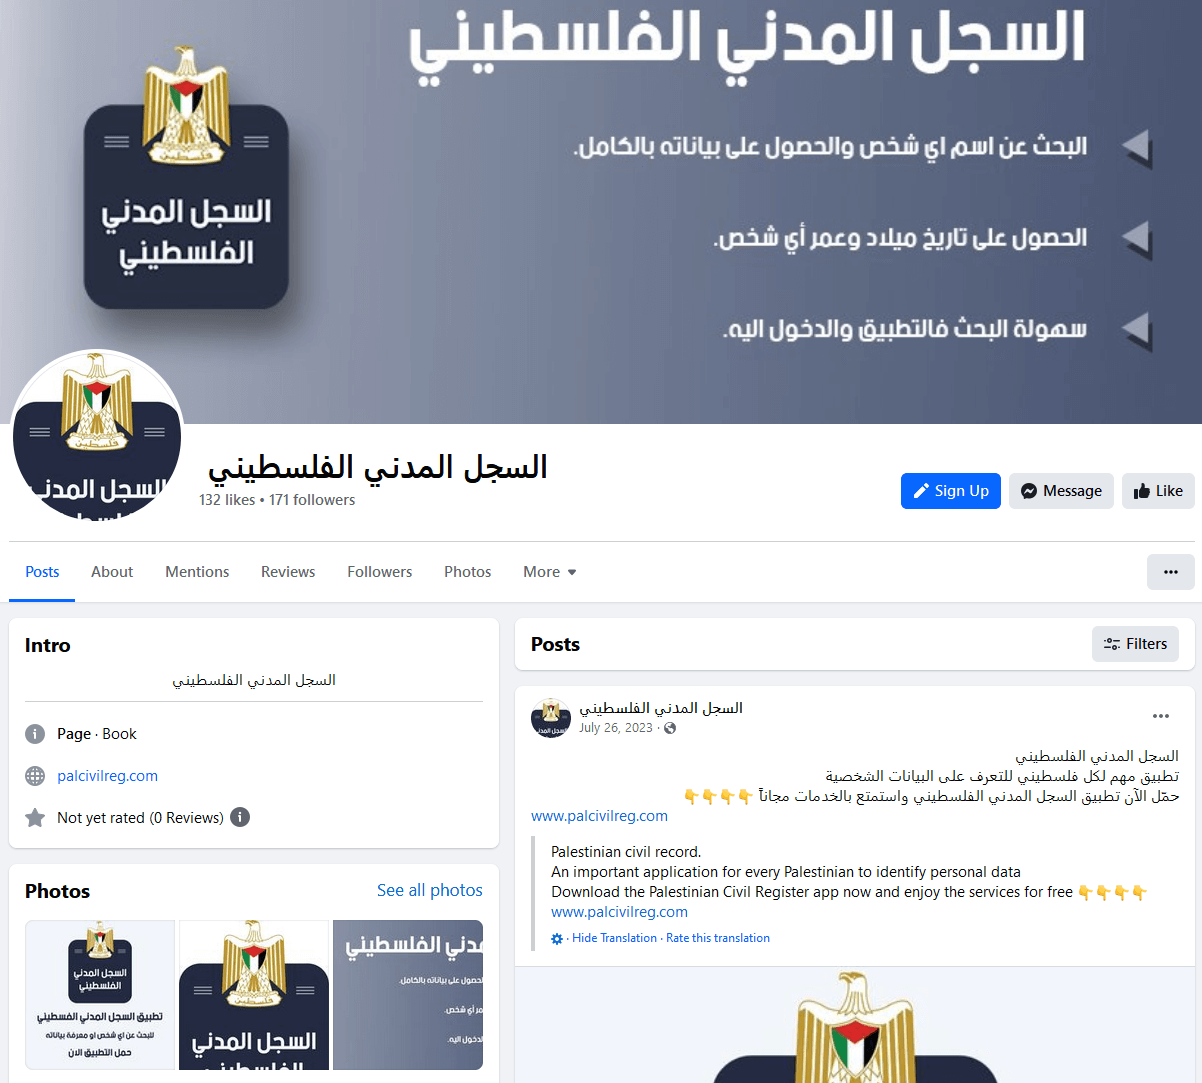 Figure 7. Facebook page promoting the palcivilreg[.]com website for every Palestinian to identify personal data